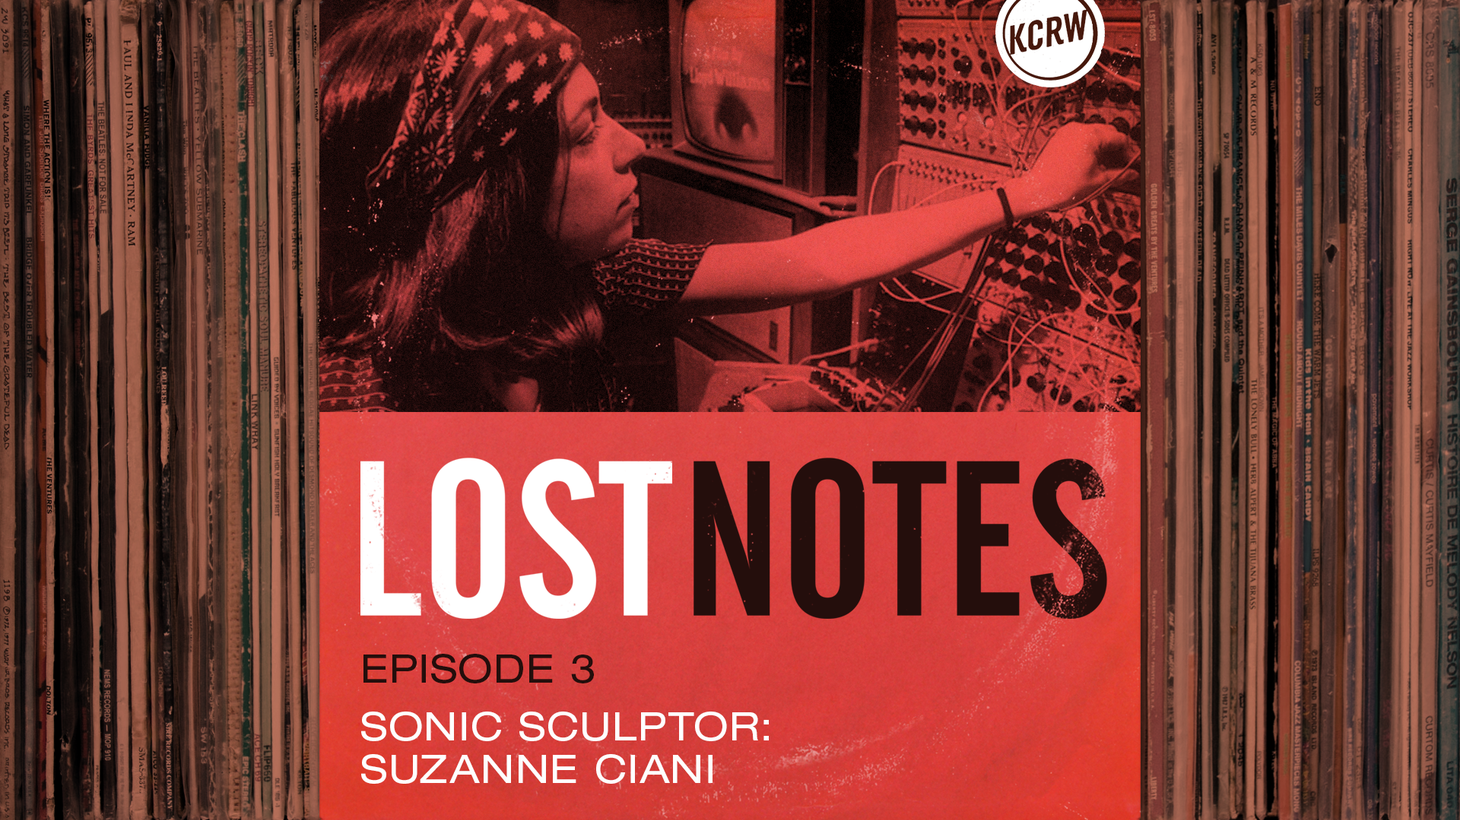 Synth pioneer Suzanne Ciani used an esoteric instrument to design some of the most well-known commercial sounds of the 20th century.